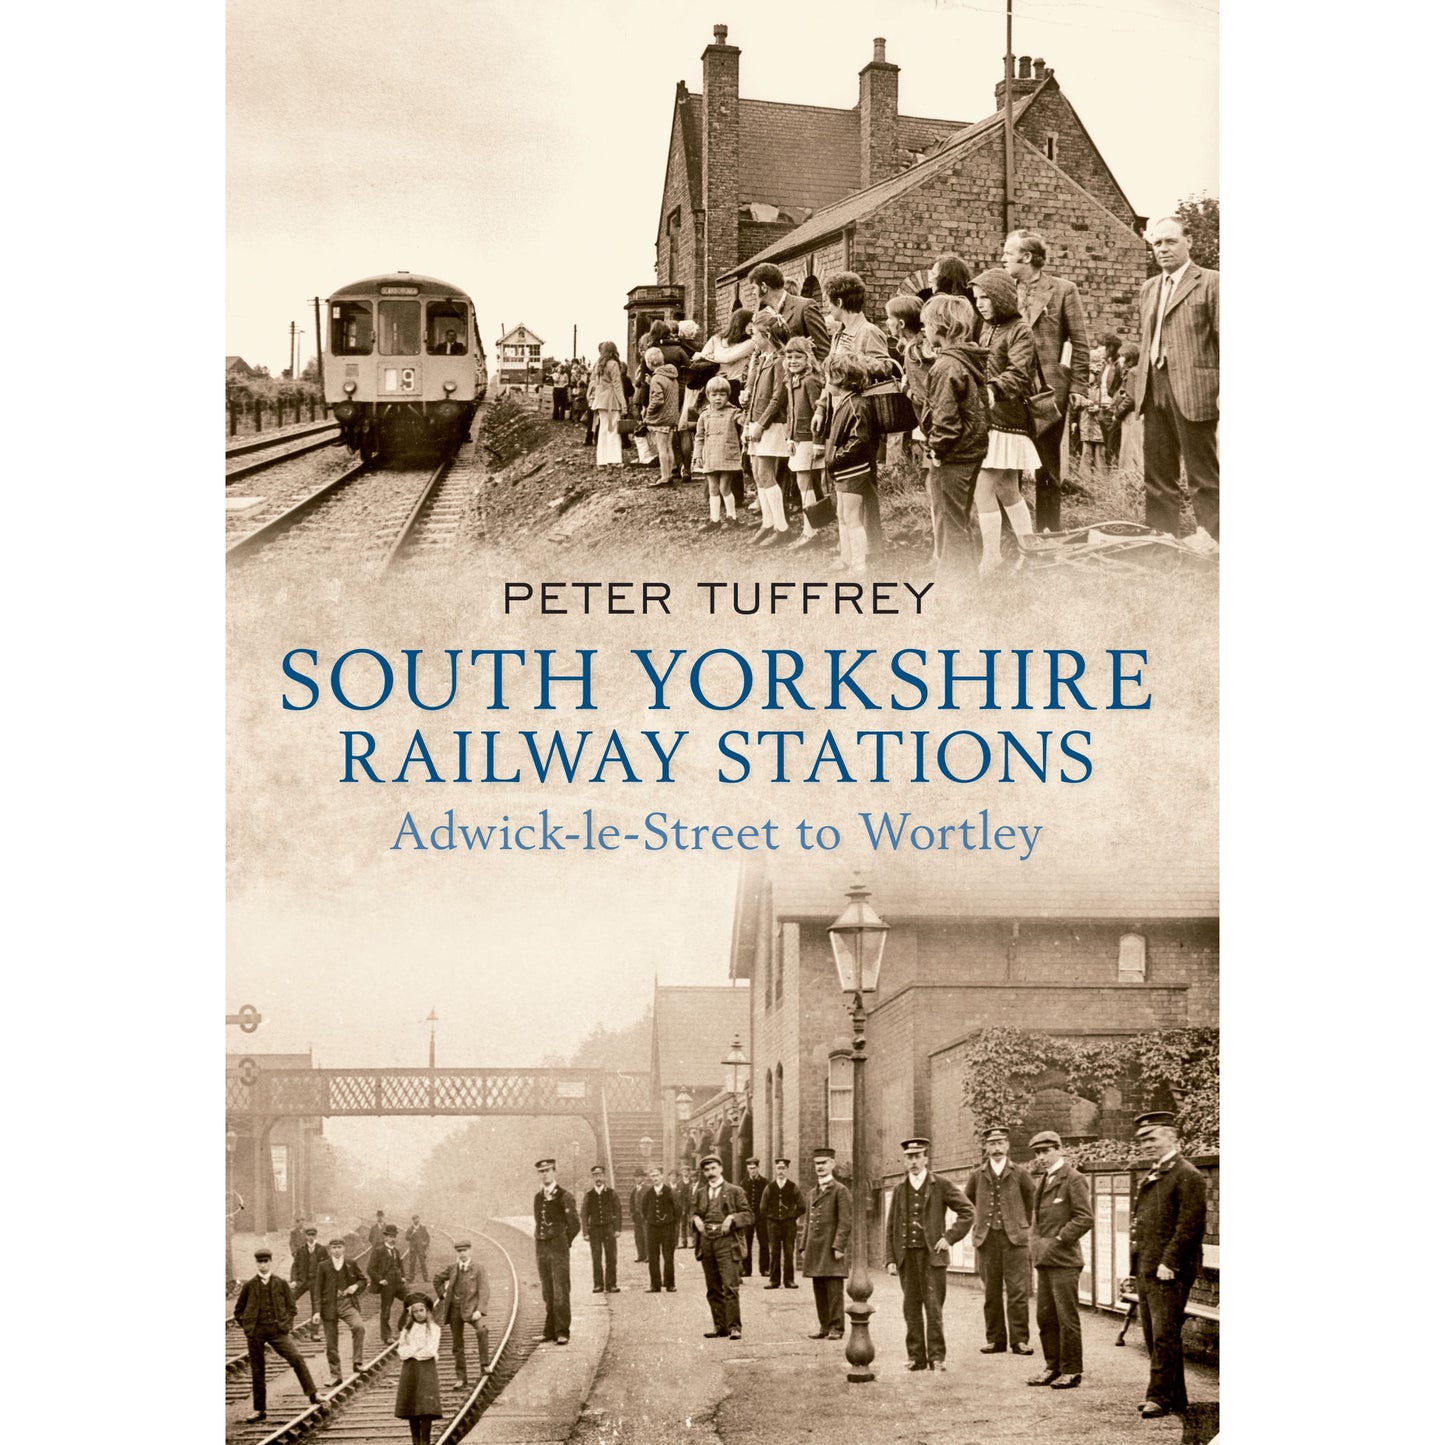 Front of book with two black and white photos of railway stations and Peter Tuffrey, South Yorkshire Railway Stations, Adwick-le-Street to Wortley printed across middle.